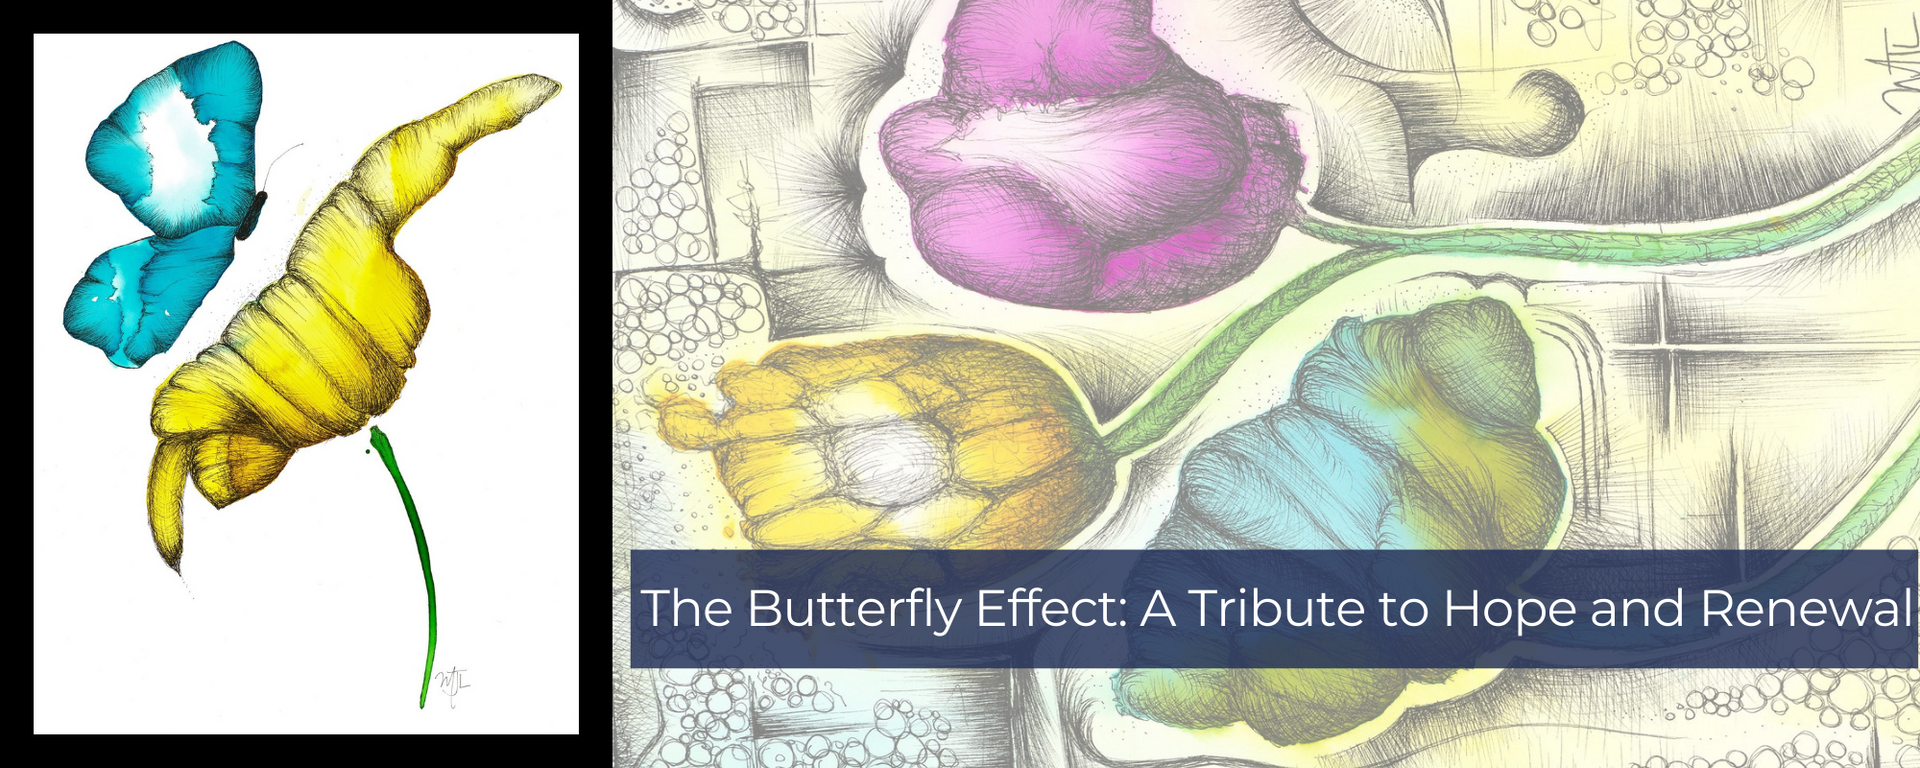 The Butterfly Effect: A Tribute to Hope and Renewal